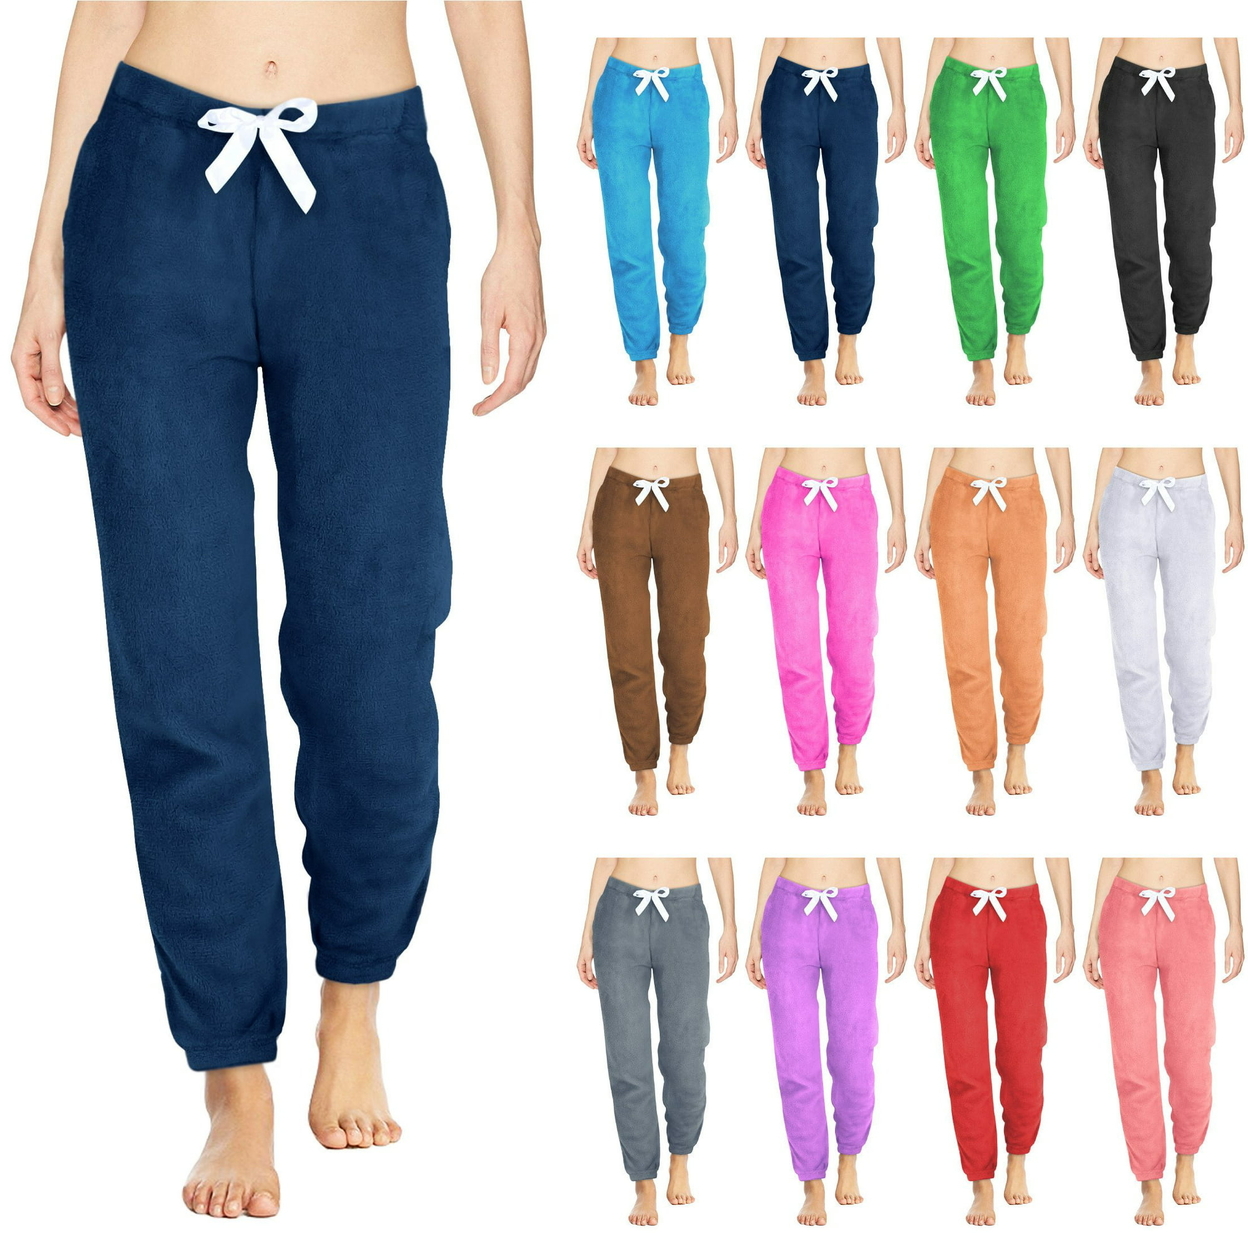 Multi-Pack: Women's Solid & Printed Ultra-Soft Comfy Stretch Micro-Fleece Pajama Lounge Pants - 1-pack, Large, Shapes